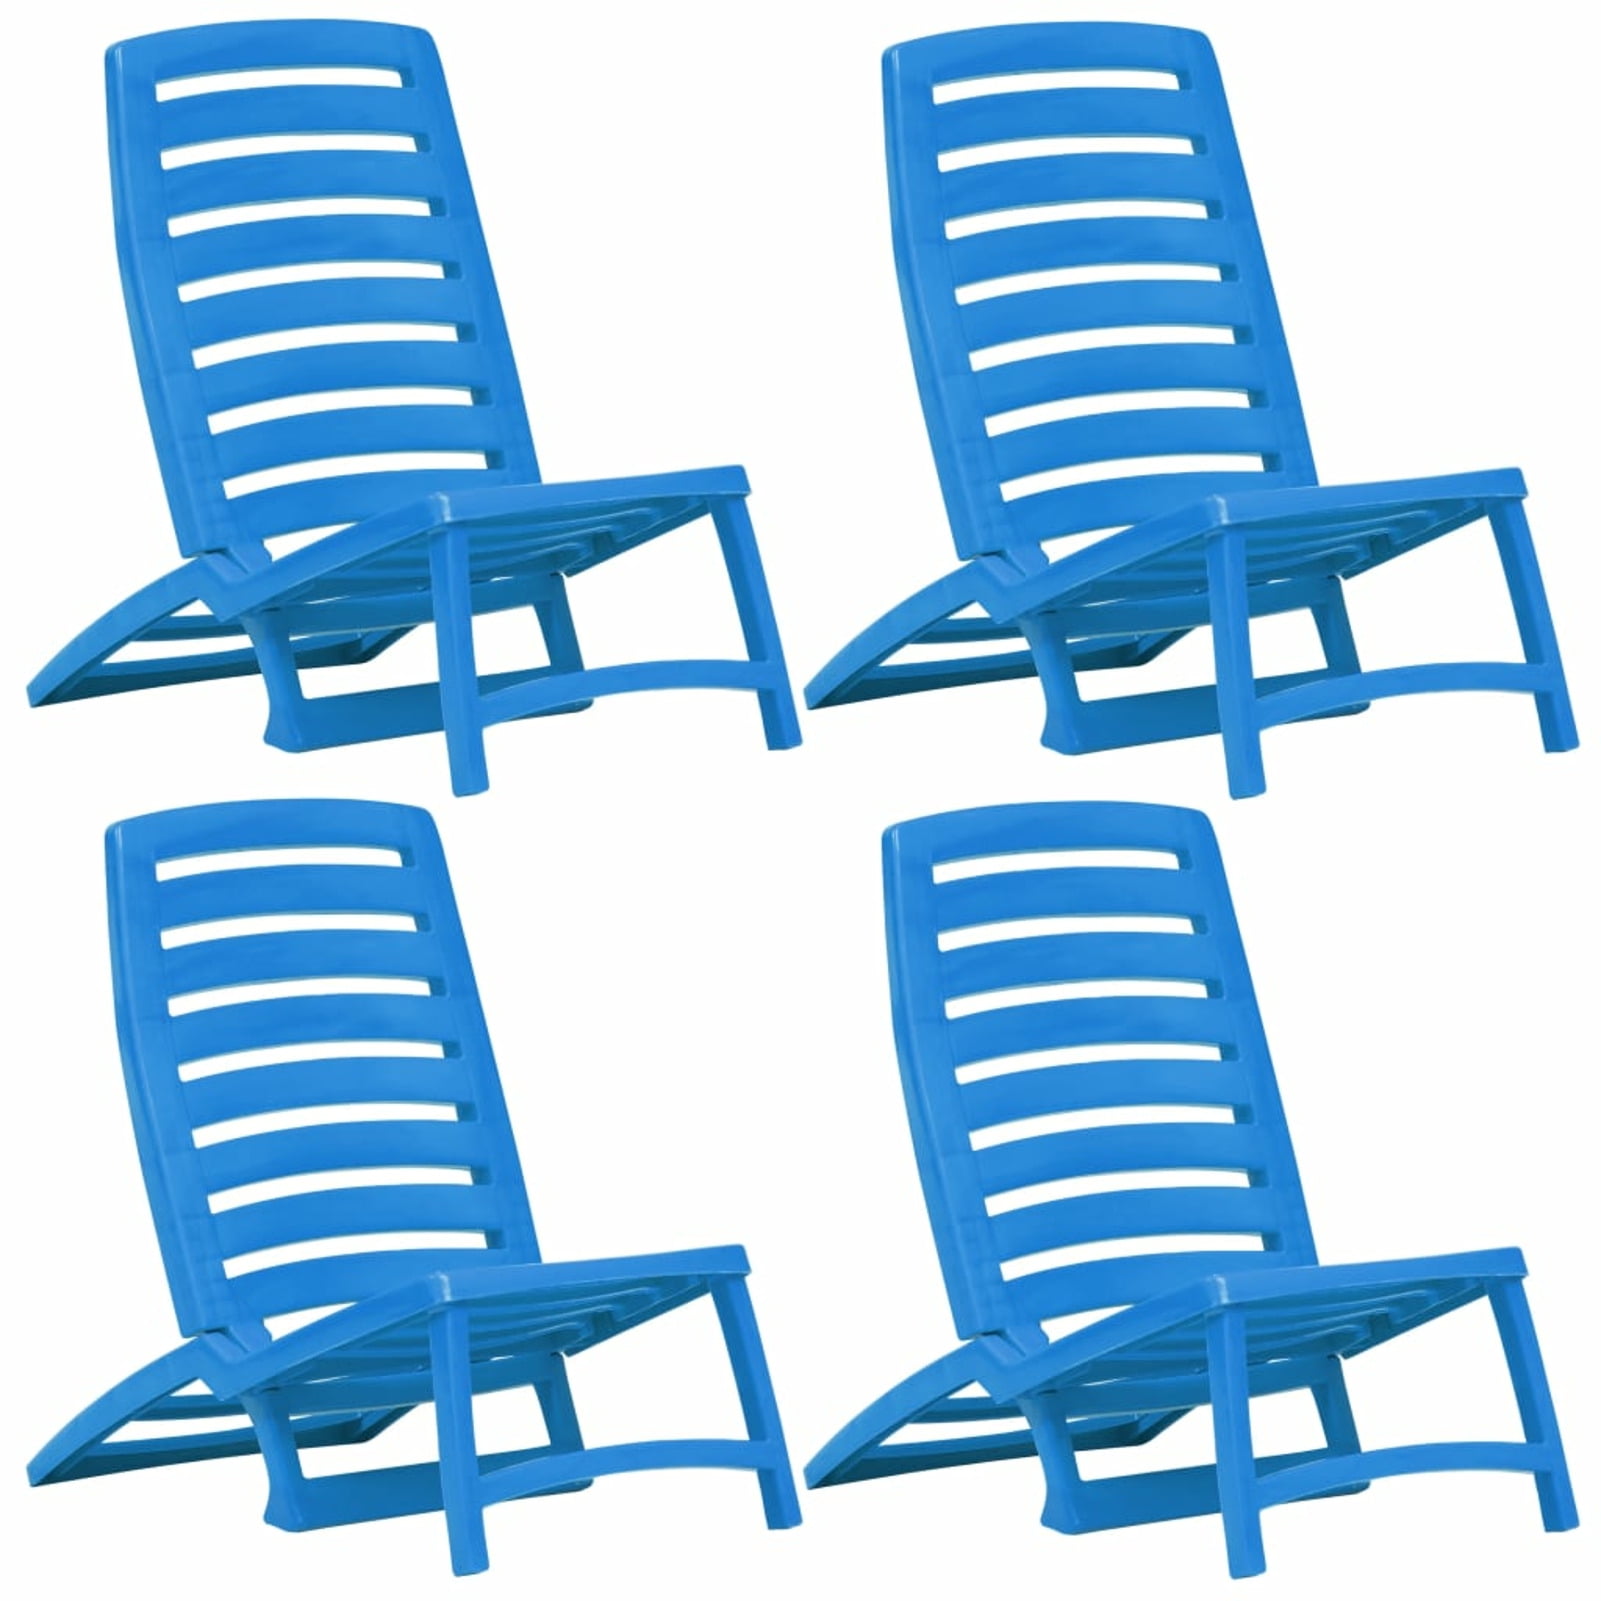 H.BETTER Folding Beach Chair 4 pcs Plastic Blue 16.5 x 22.8 x 25.2 Foldable Camping Chairs Outdoor Chairs Set for 4 Space Saving Patio Chaise Lounge